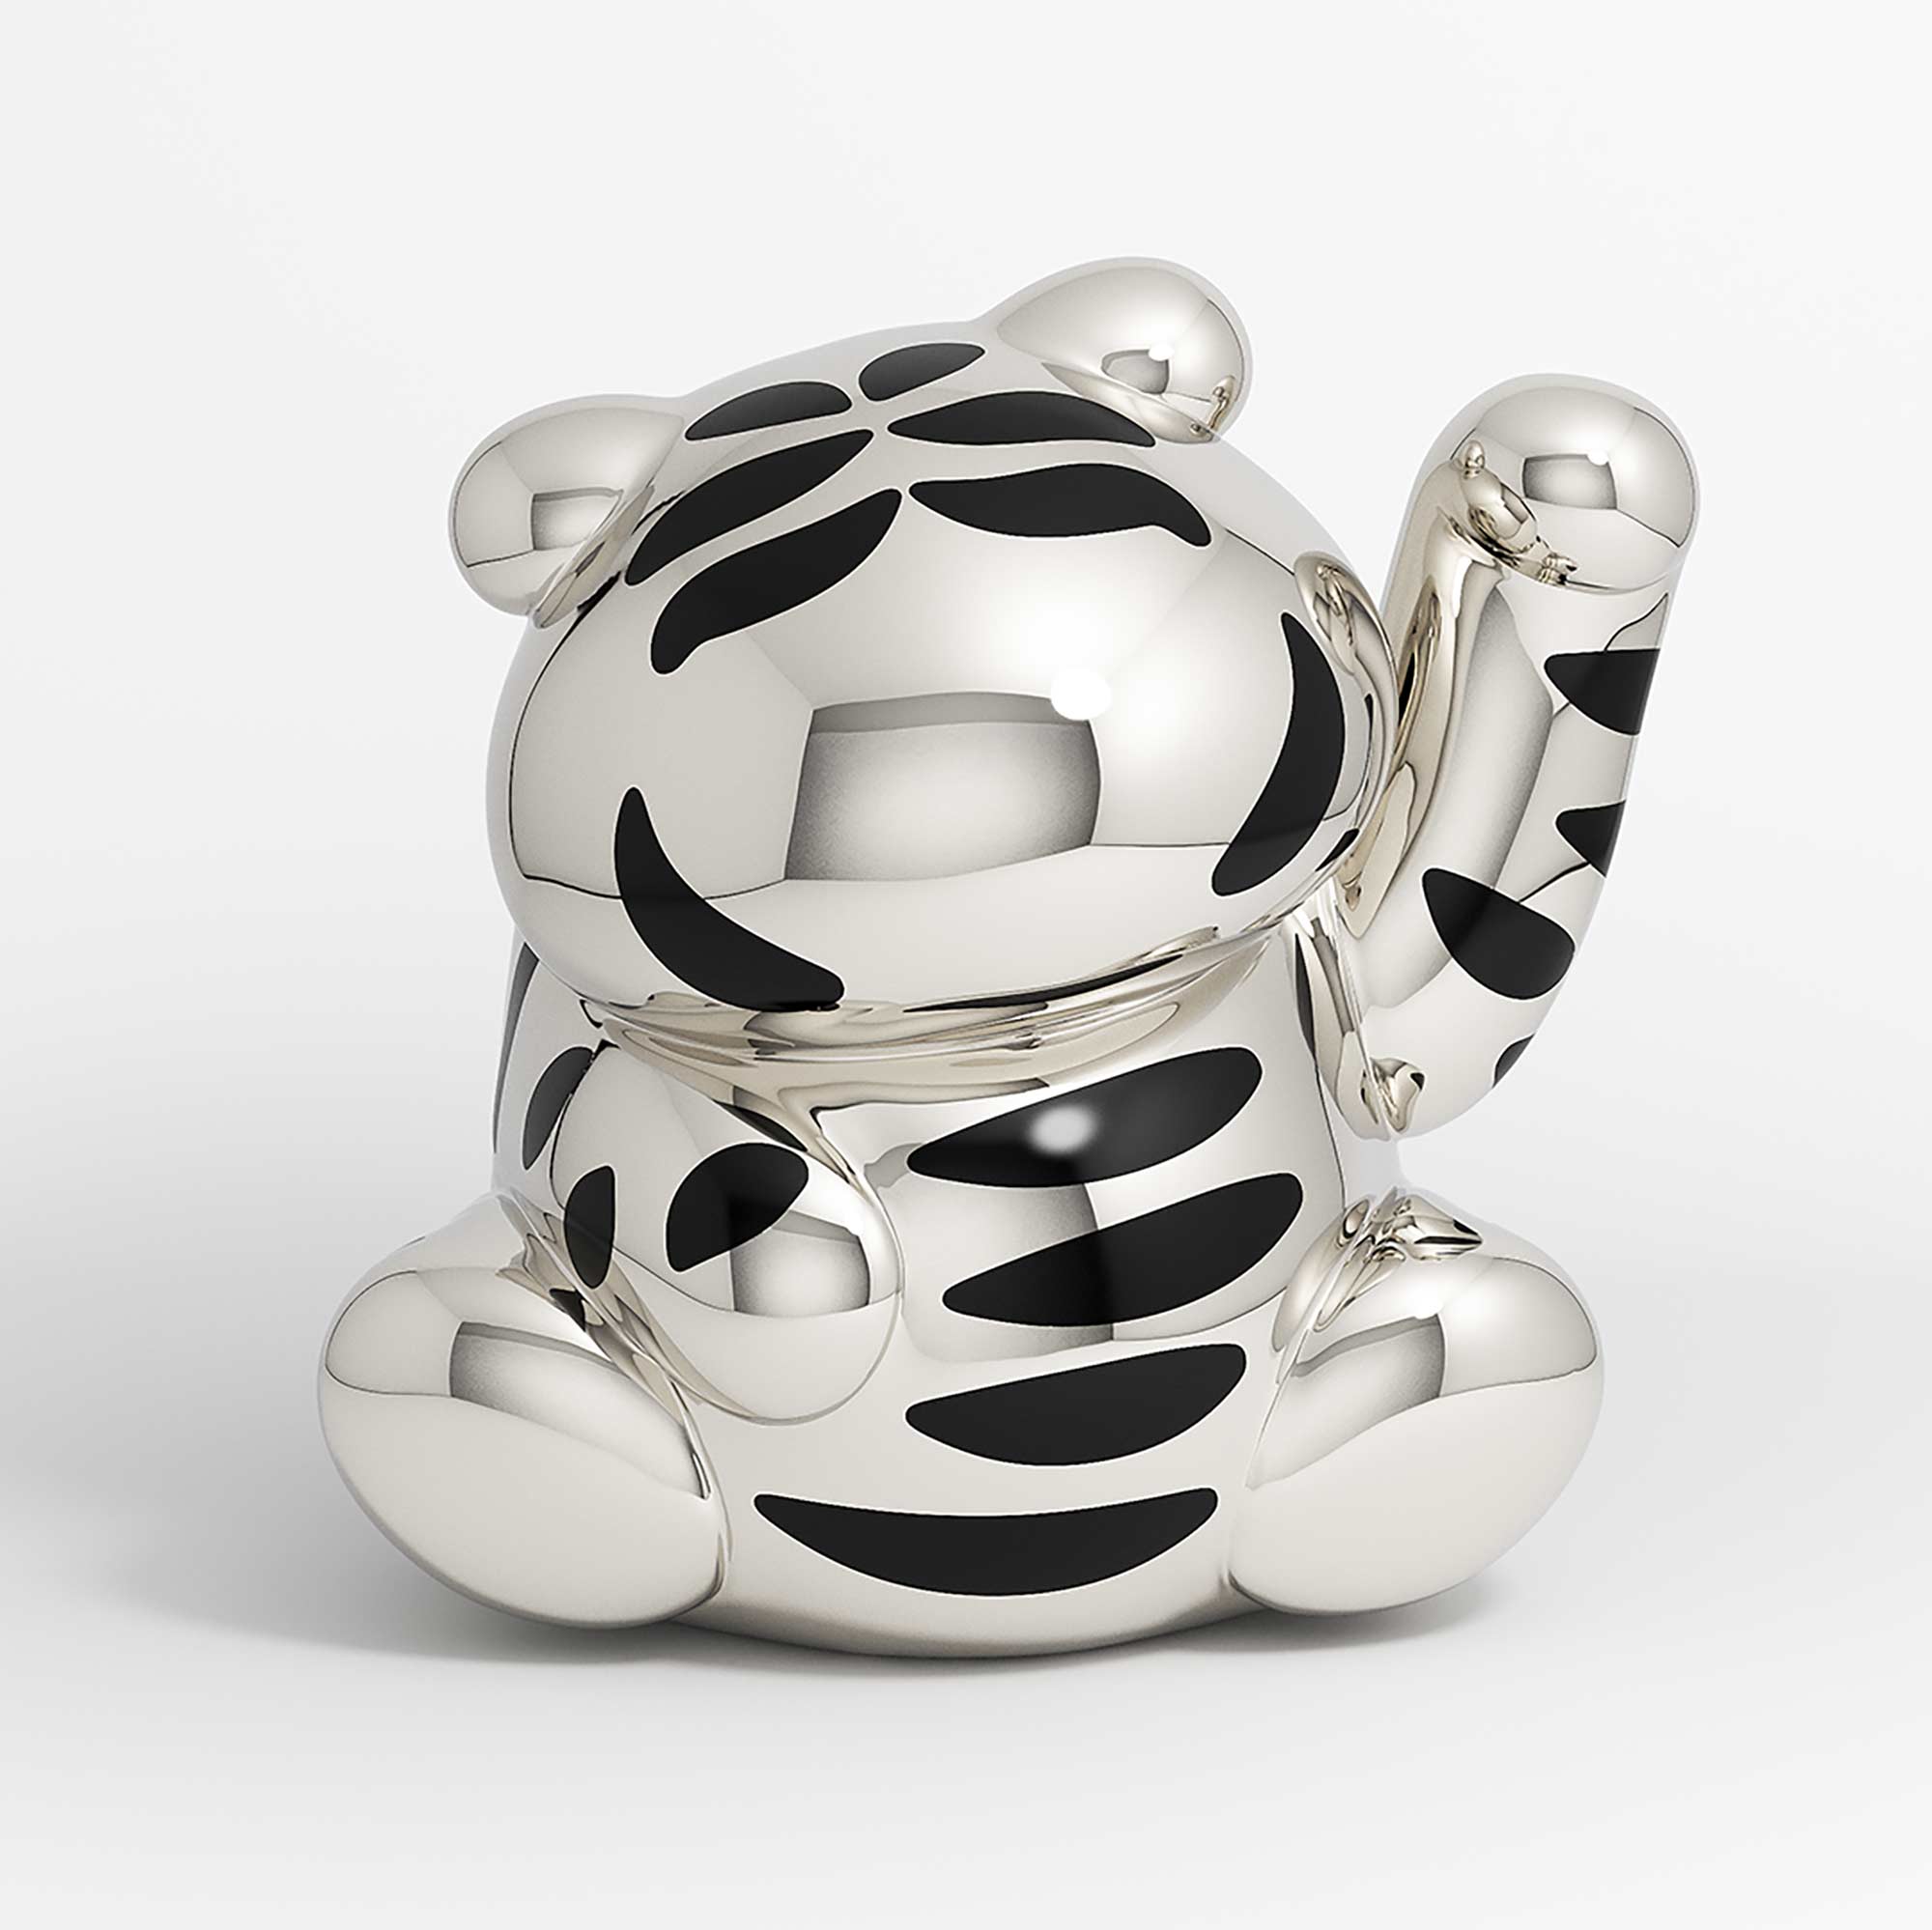 Lucky Tiger Cub, tiger cat sculpture, Mirror Polished Stainless Steel Sculpture, by artist Ferdi B Dick, front view